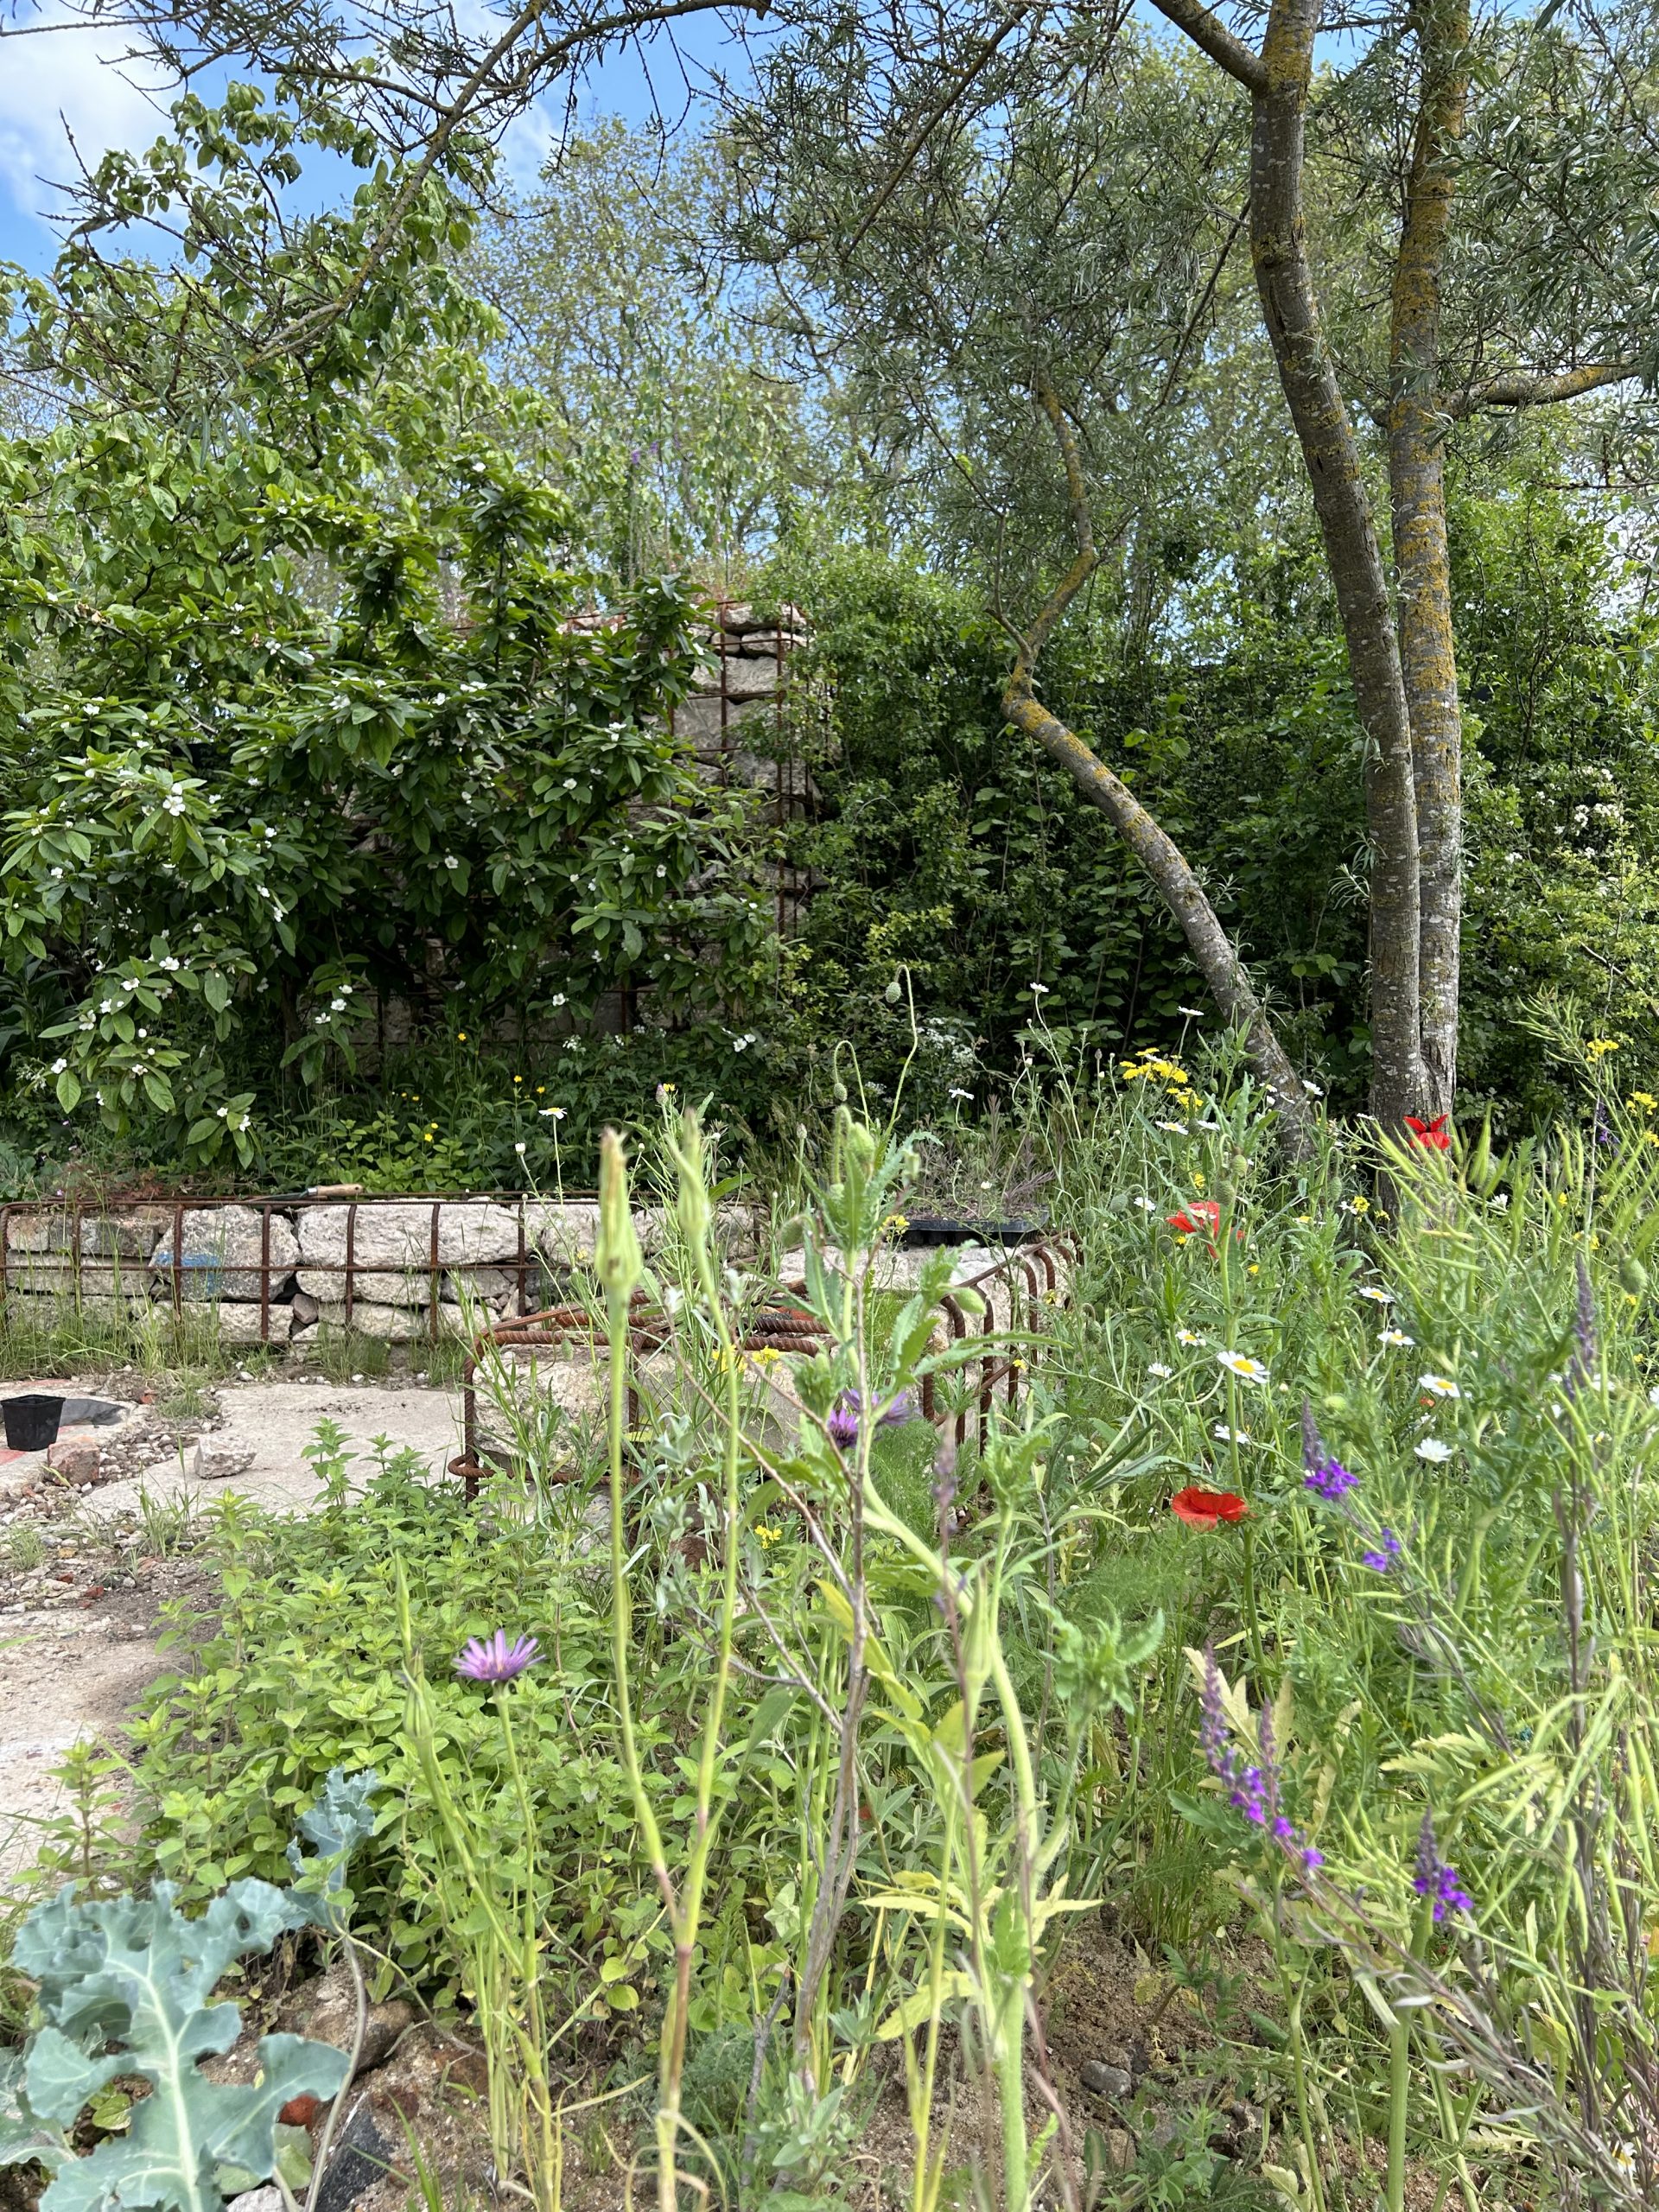 wildflower planting in a garden with flicks of red and purple colour looking in to area of concrete seating and trees in the background